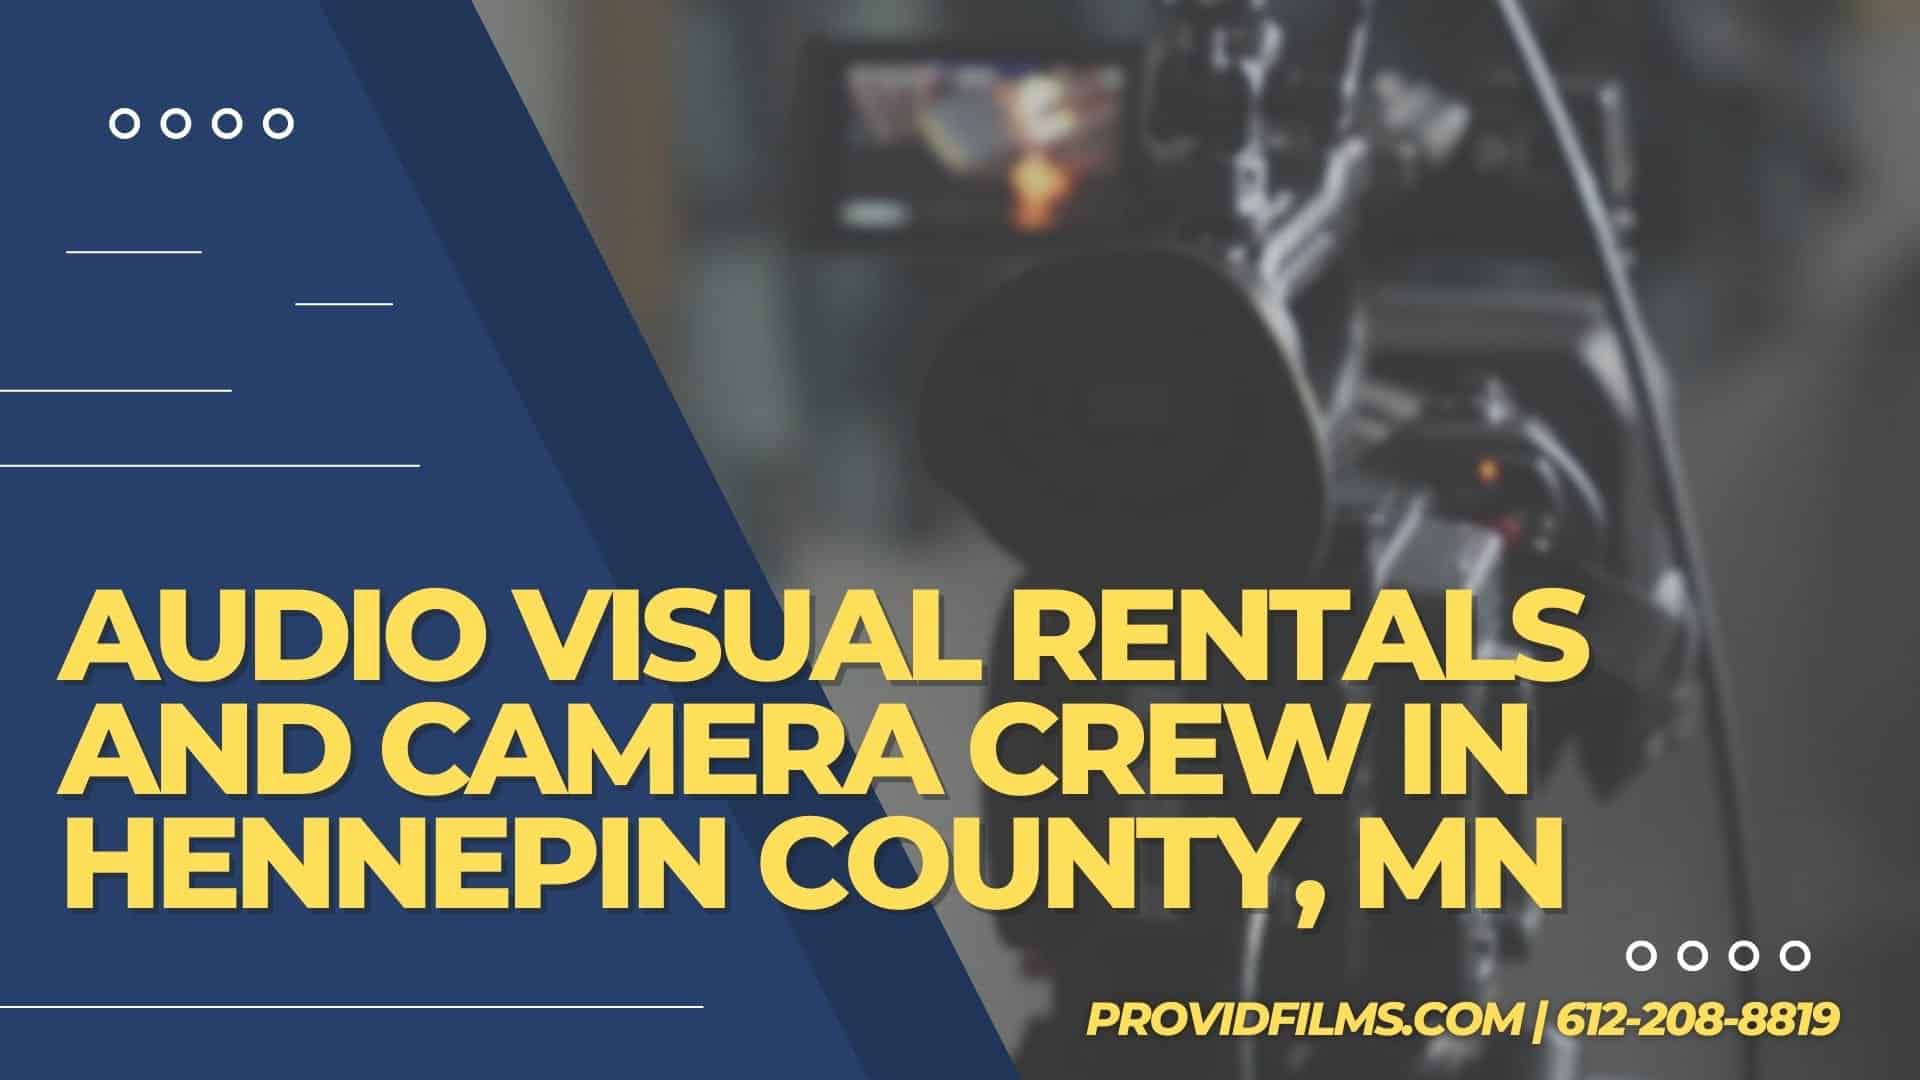 Audio Visual Rentals and Camera Crew in Hennepin County, MN